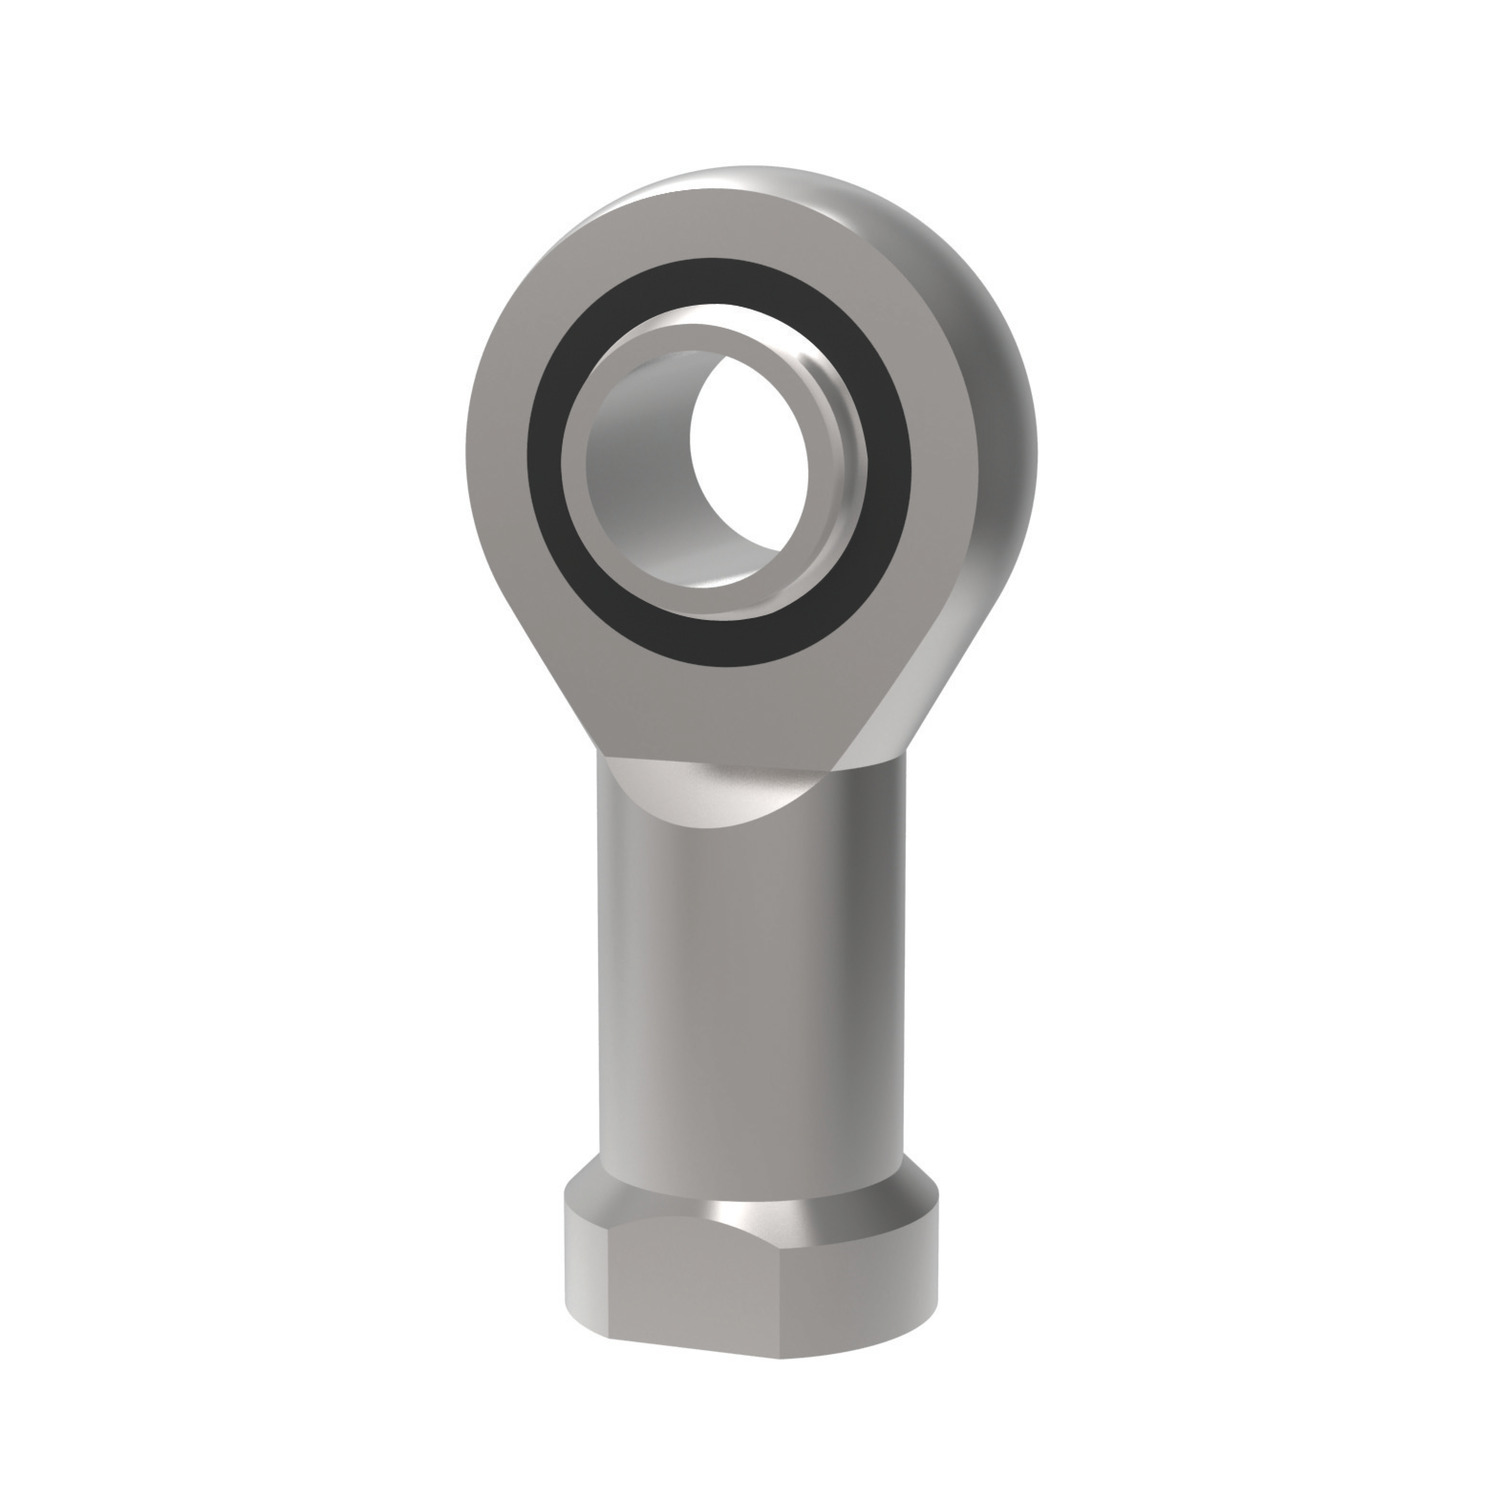 Product R3575.F, Low Cost Rod End - Female with integral spherical plain bearing / 